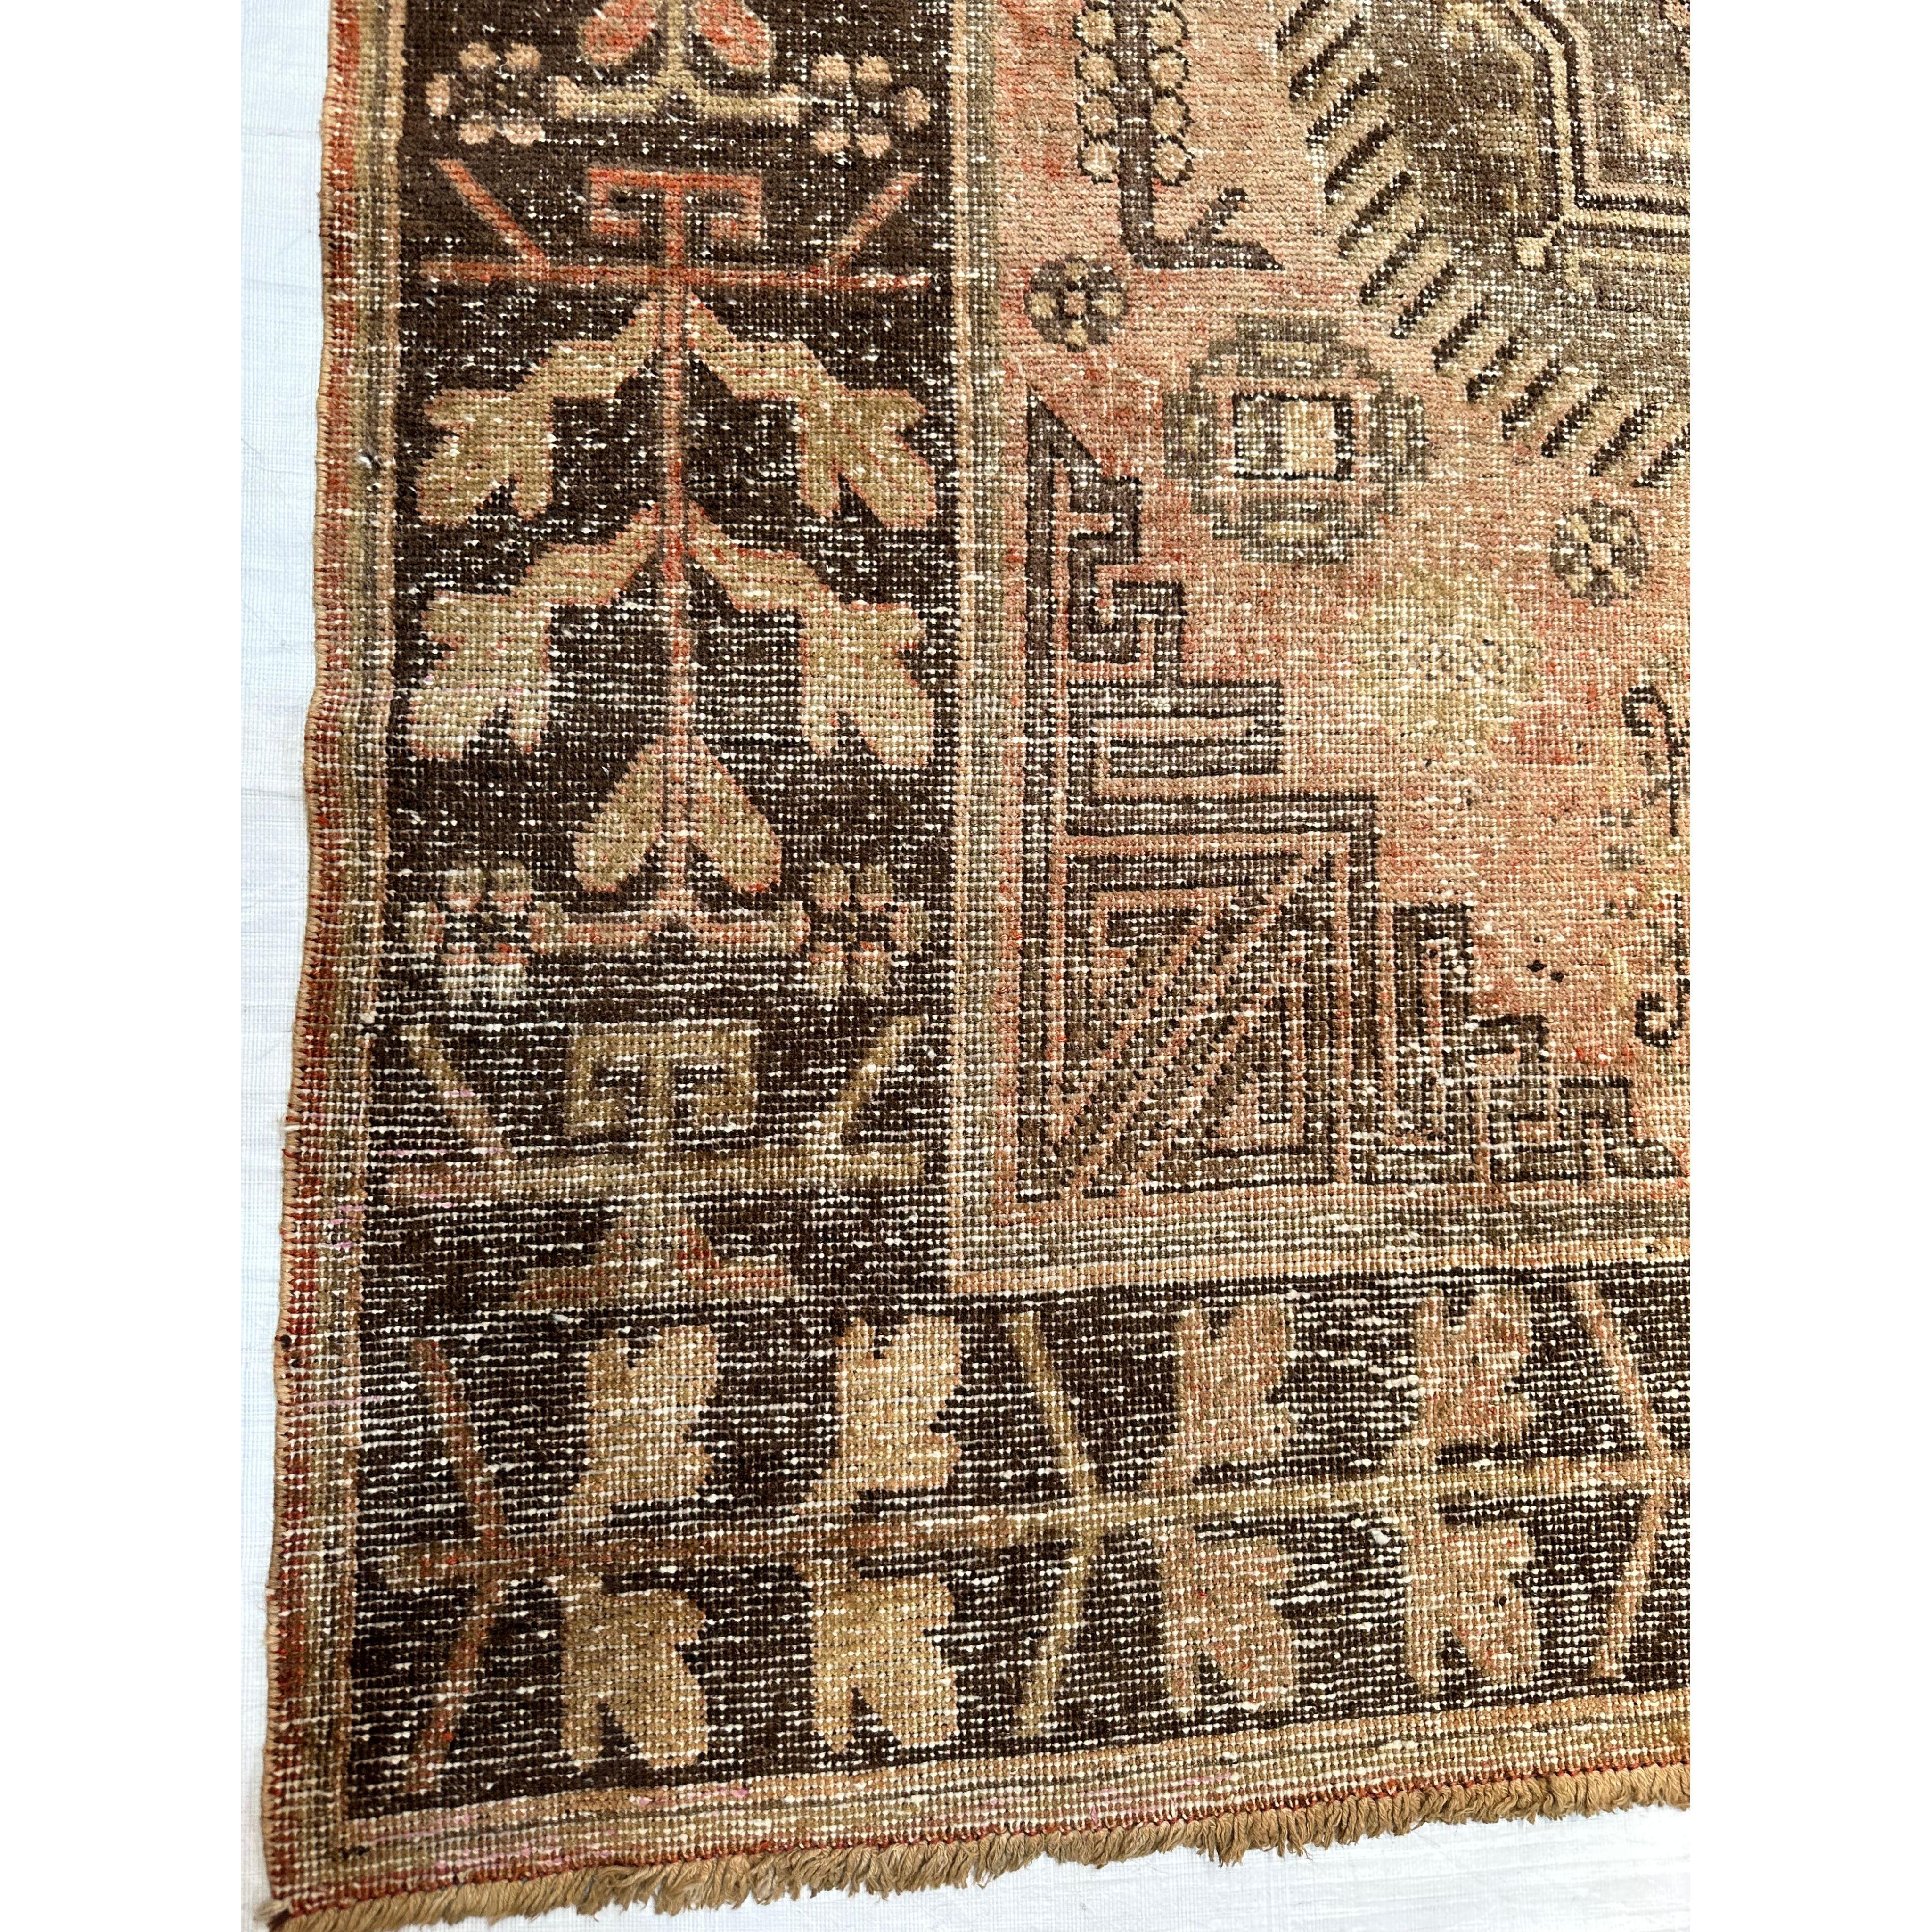 19th-Century Tribal Khotan Samarkand Rug In Good Condition For Sale In Los Angeles, US